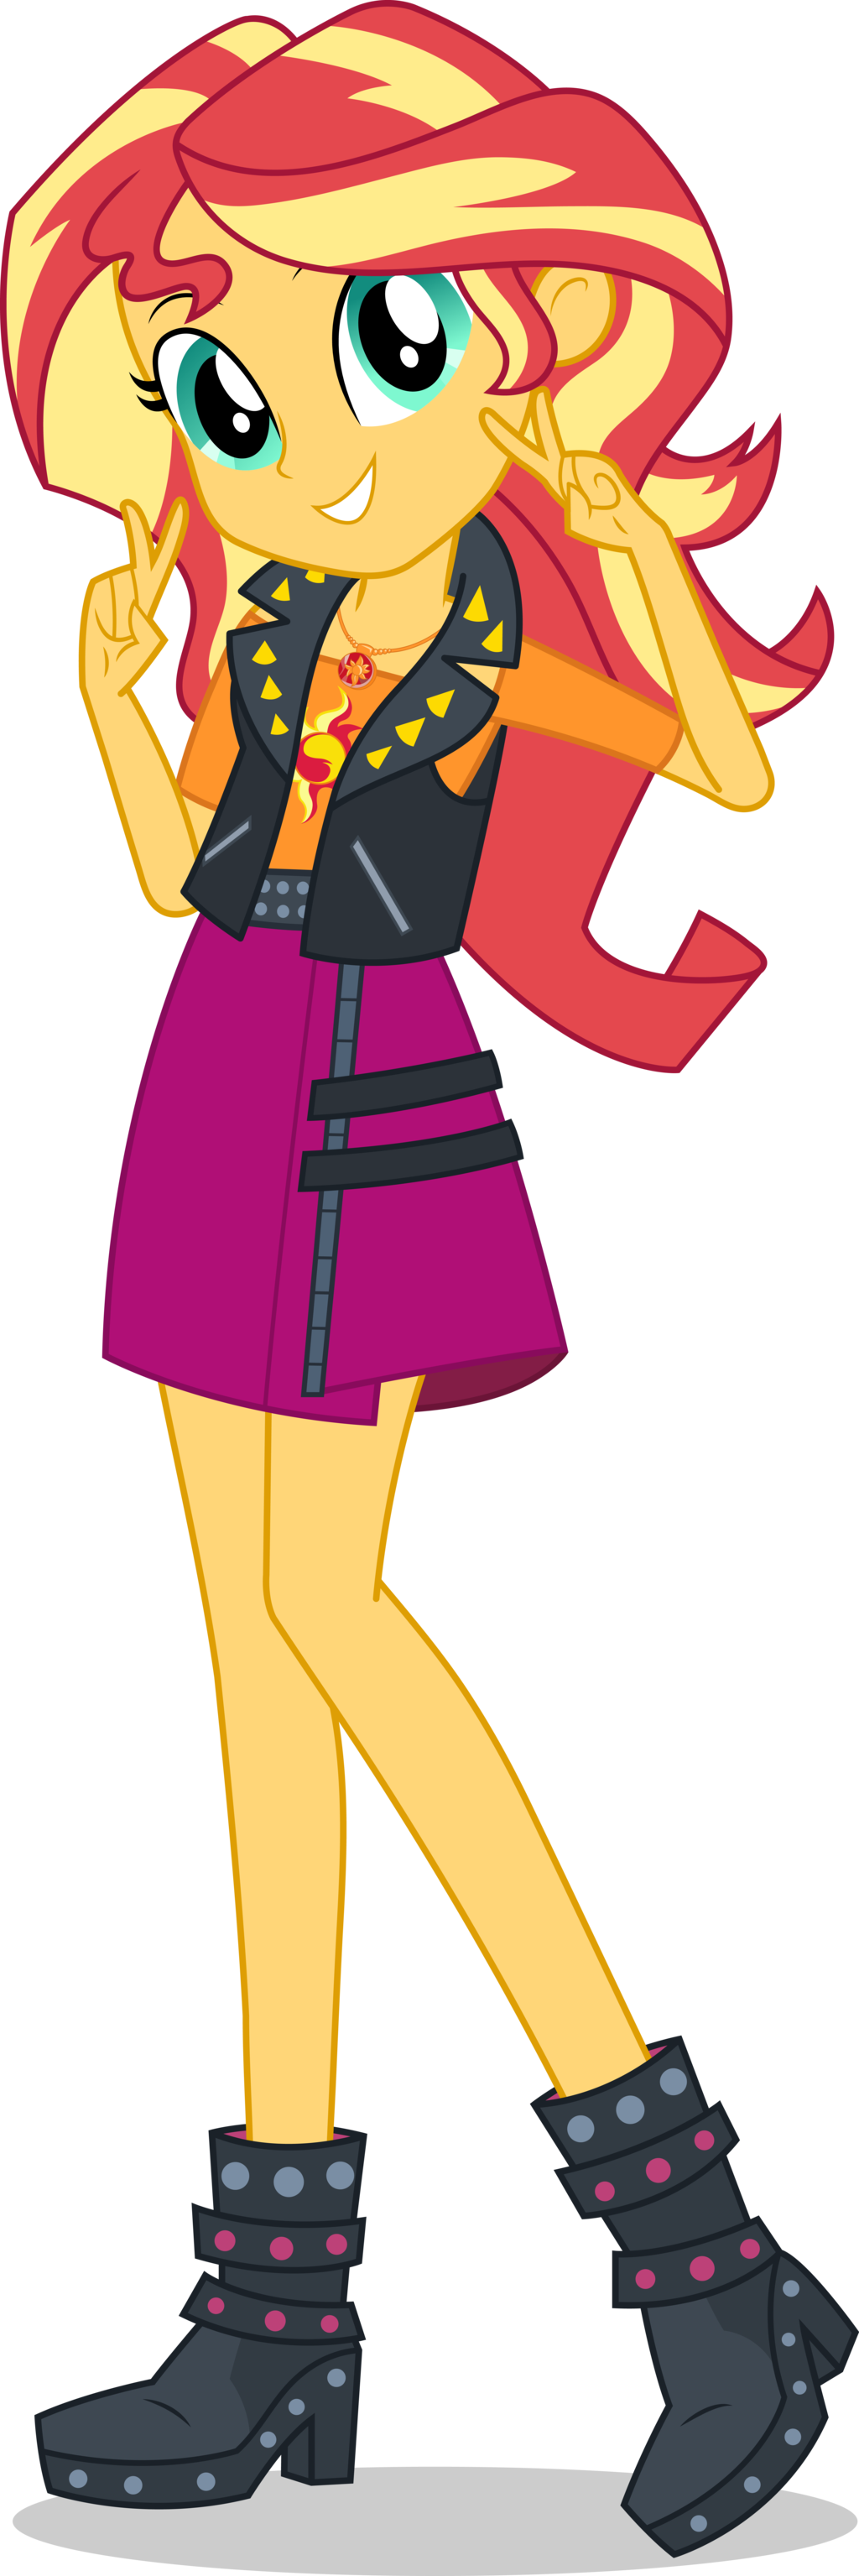 Sunset Shimmer Digital Series Vector By Icantunloveyou - My Little Pony Equestria Girls Sunset Shimmer (1024x3070)